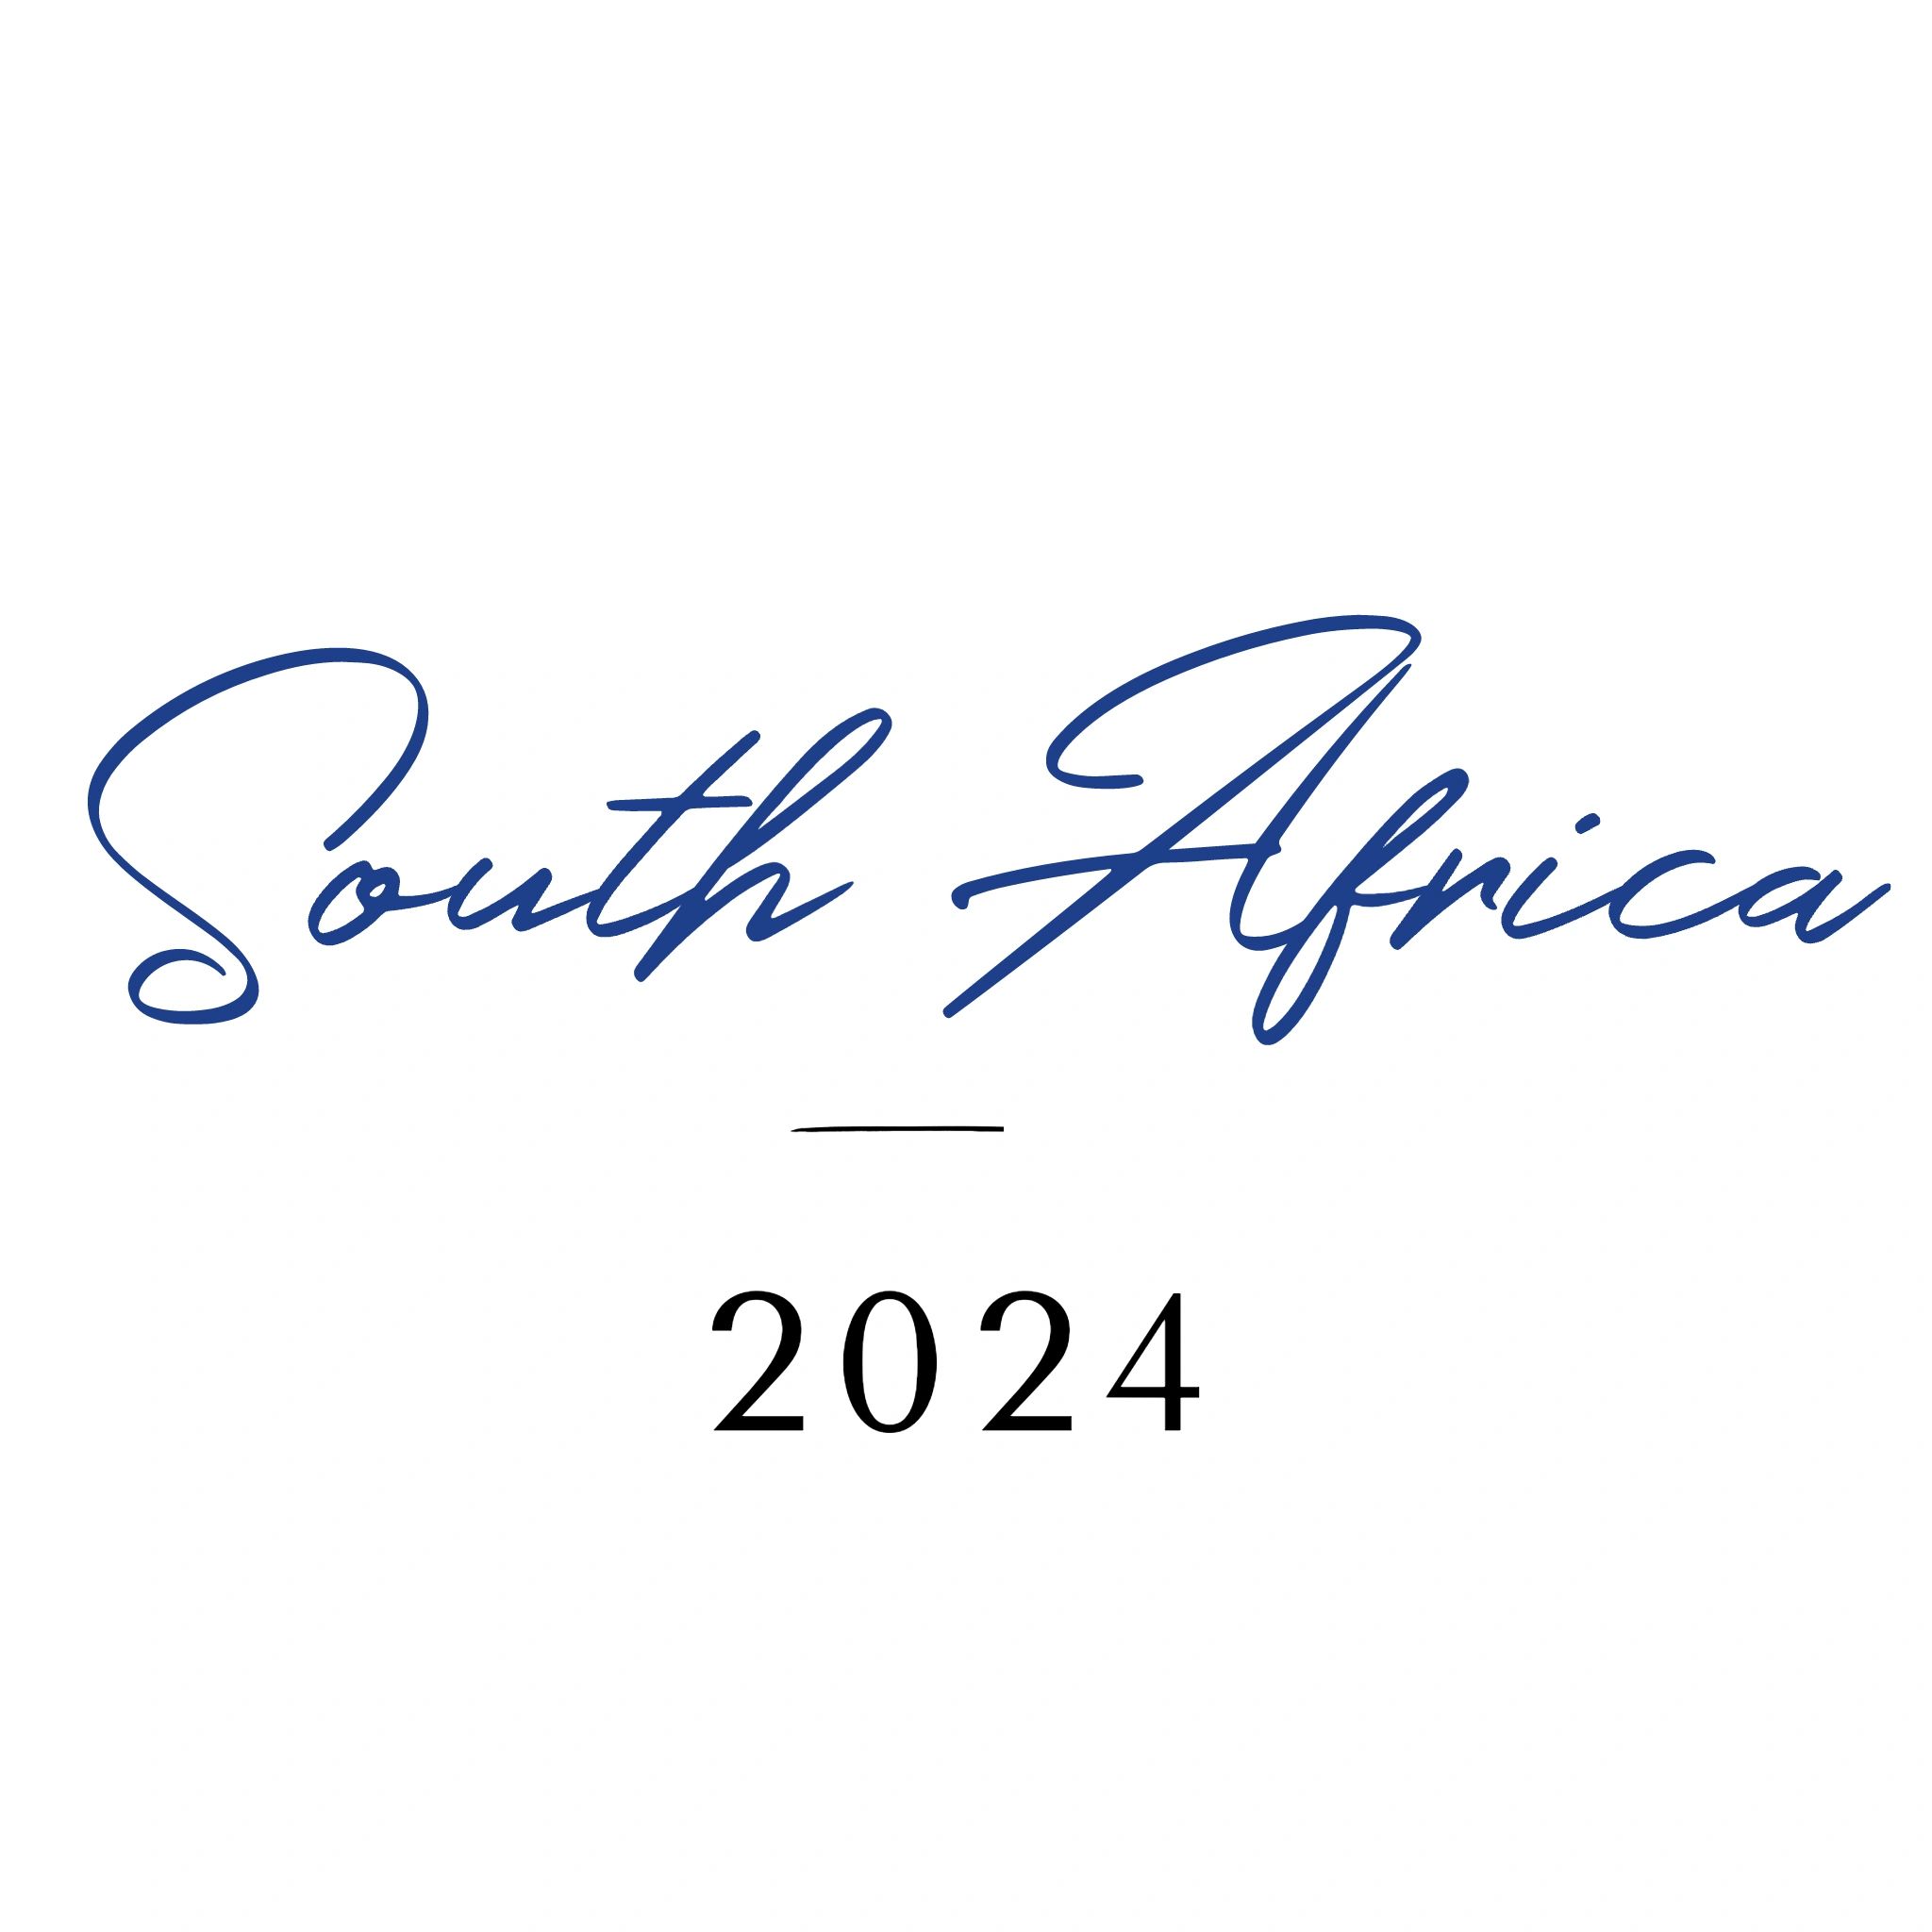 South Africa 2024